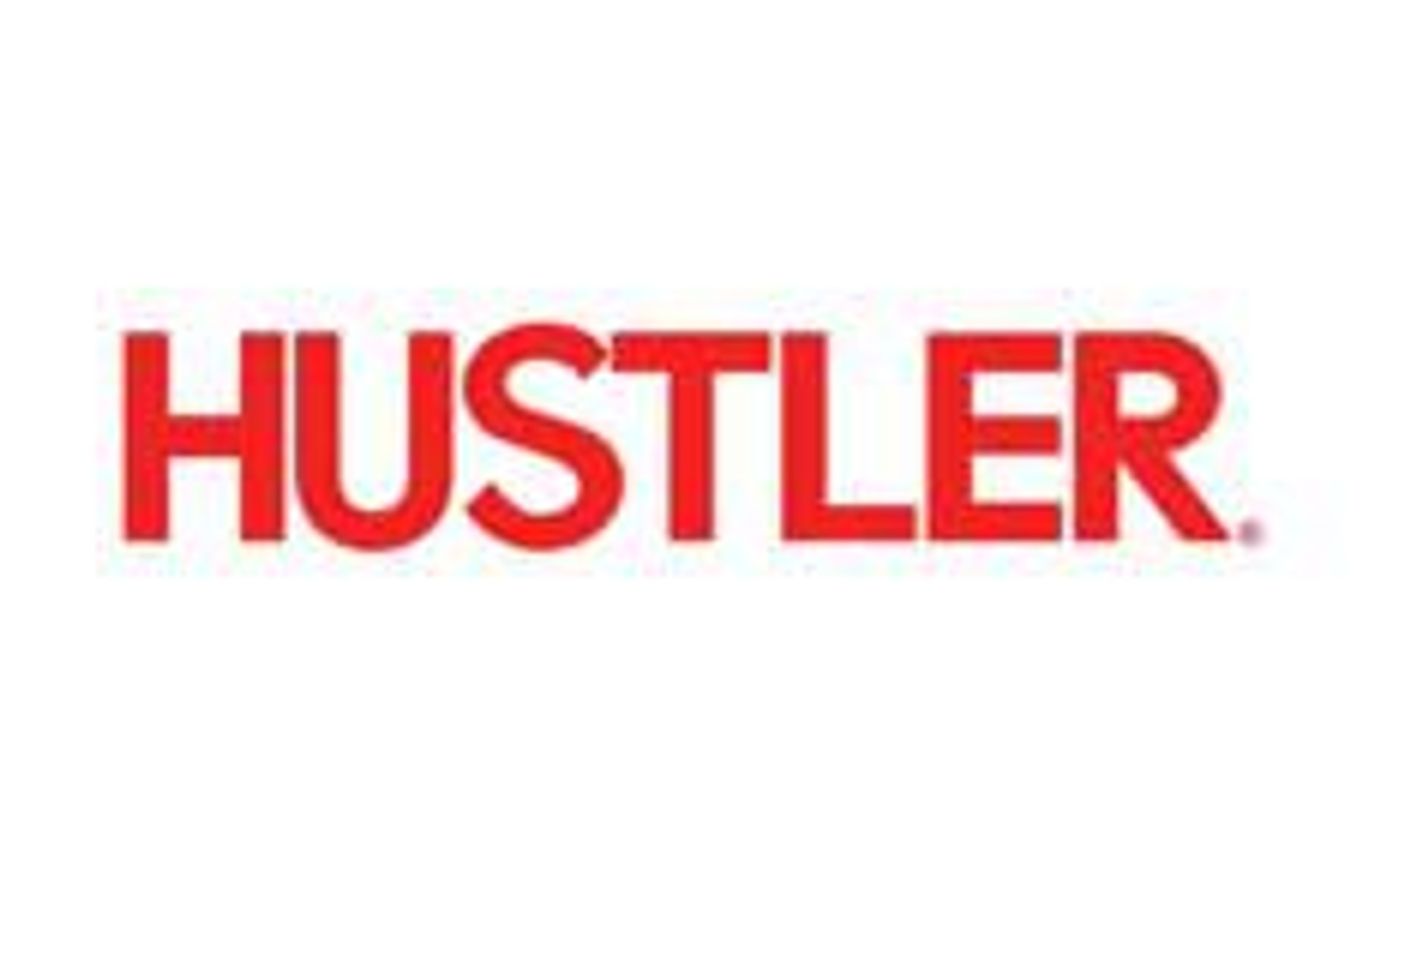 Hustler, Electric Eel To Showcase Products, Deals at ILS